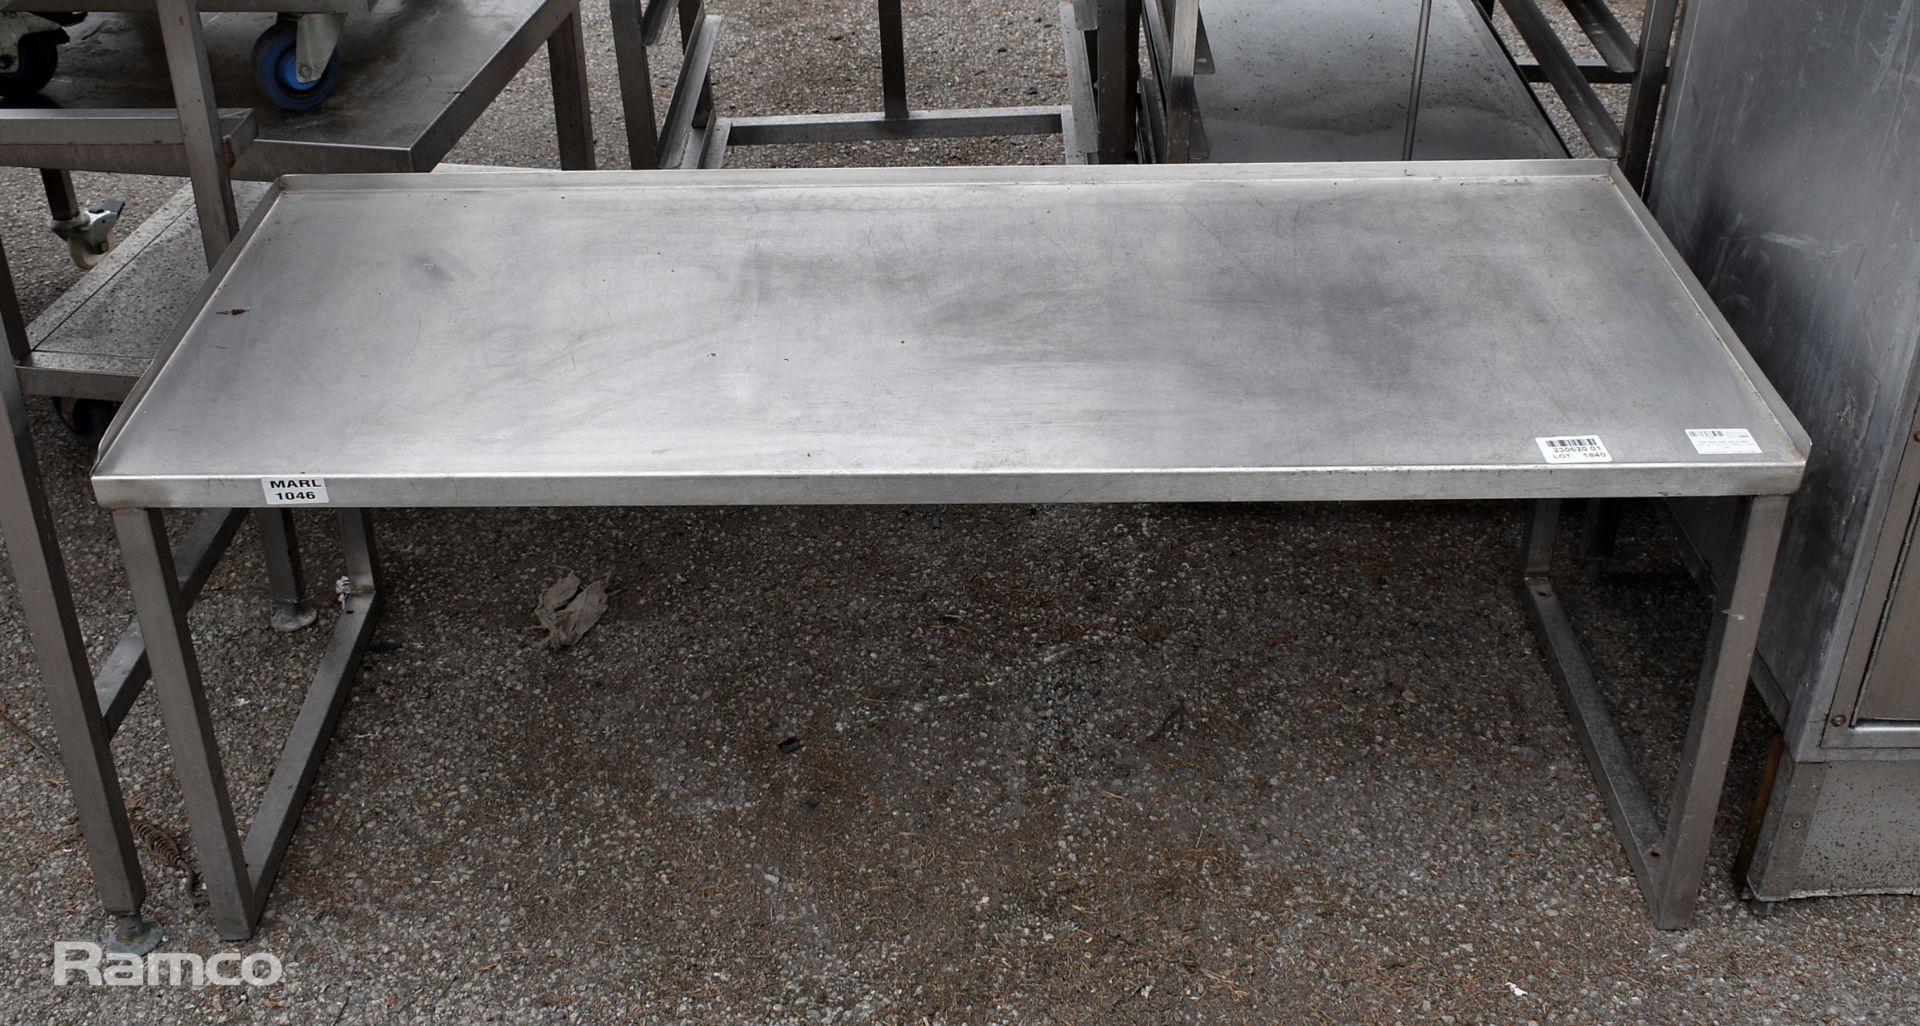 Stainless steel stand base unit - W 1360 x D 560 x H 520 mm